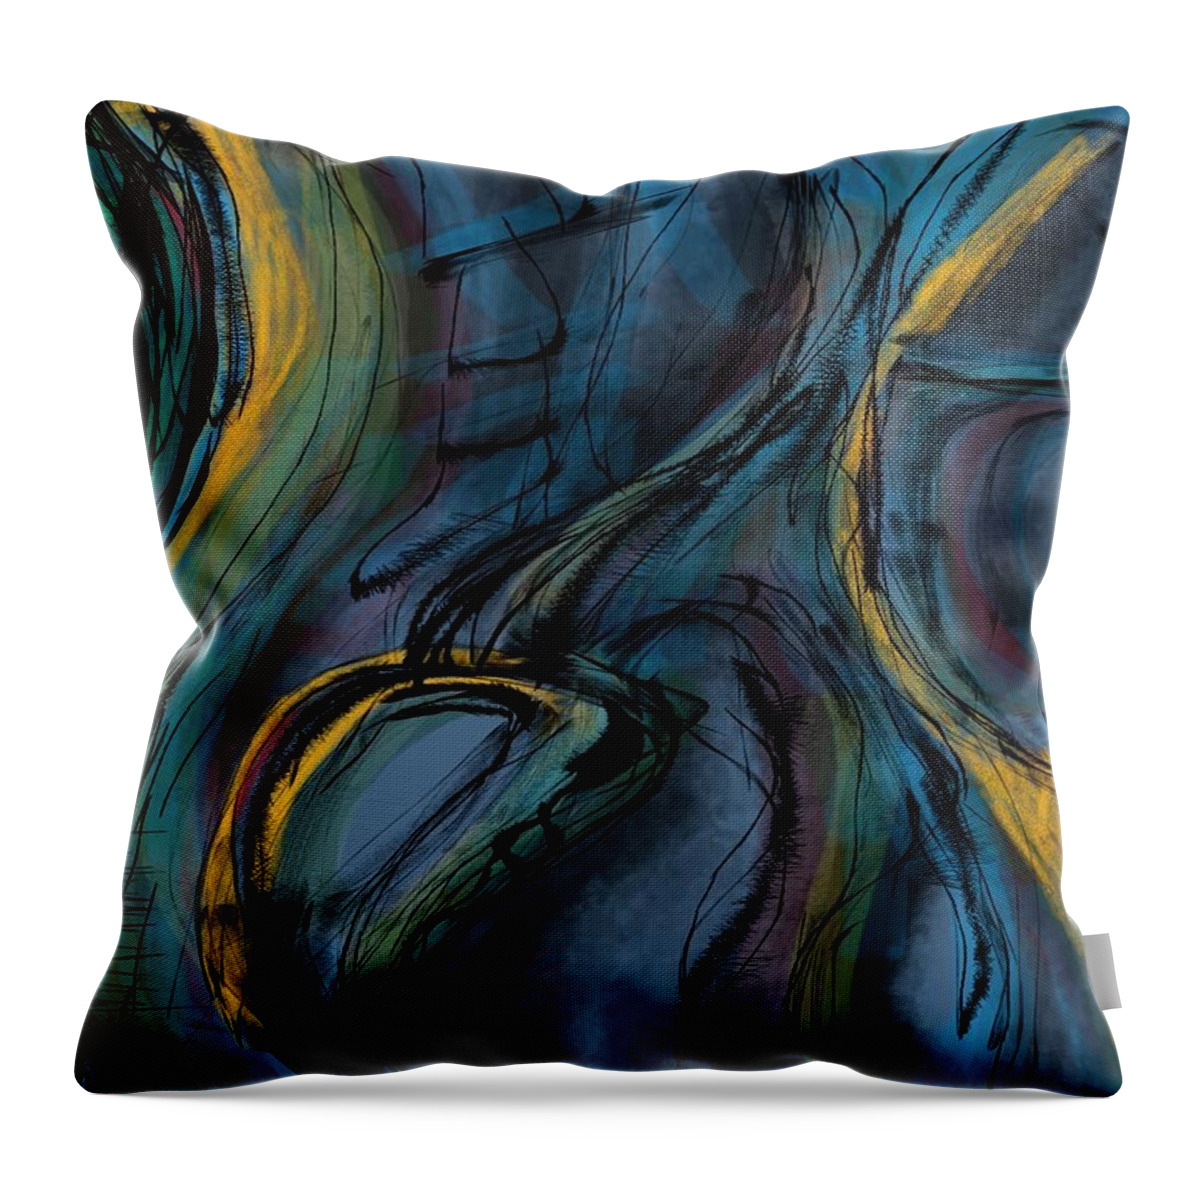 Blue Throw Pillow featuring the digital art Voices of nature by Ljev Rjadcenko